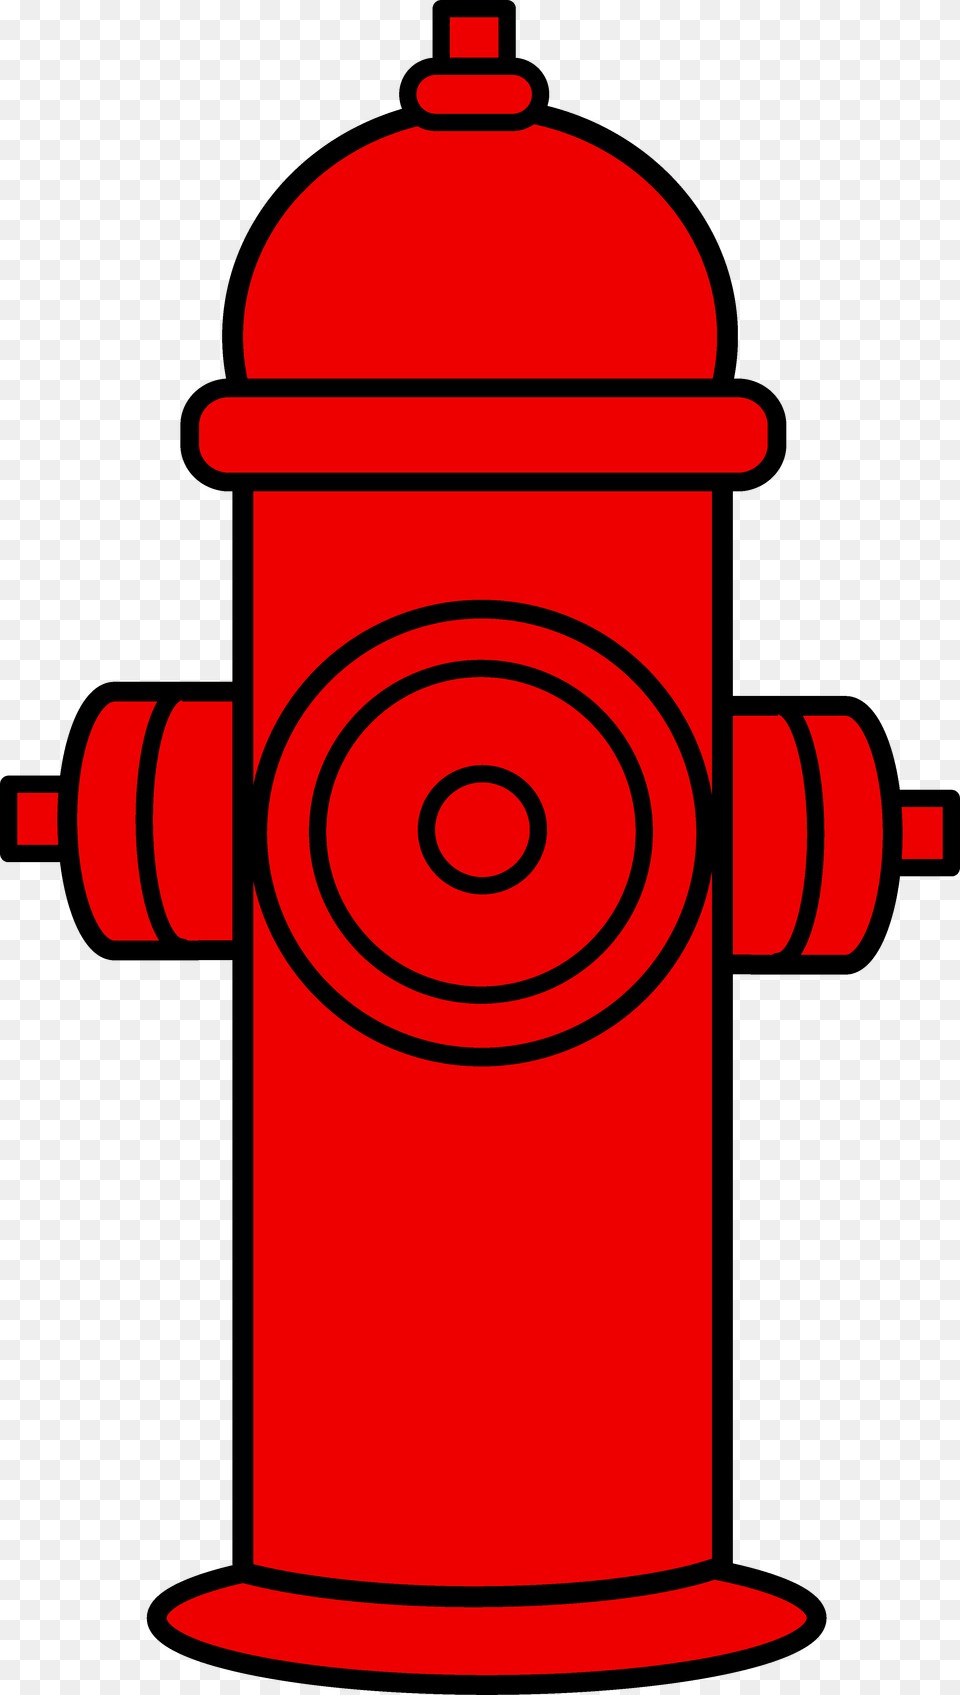 Red Fire Hydrant Punchneedle Fire Truck Paw Patrol, Fire Hydrant, Dynamite, Weapon Free Transparent Png